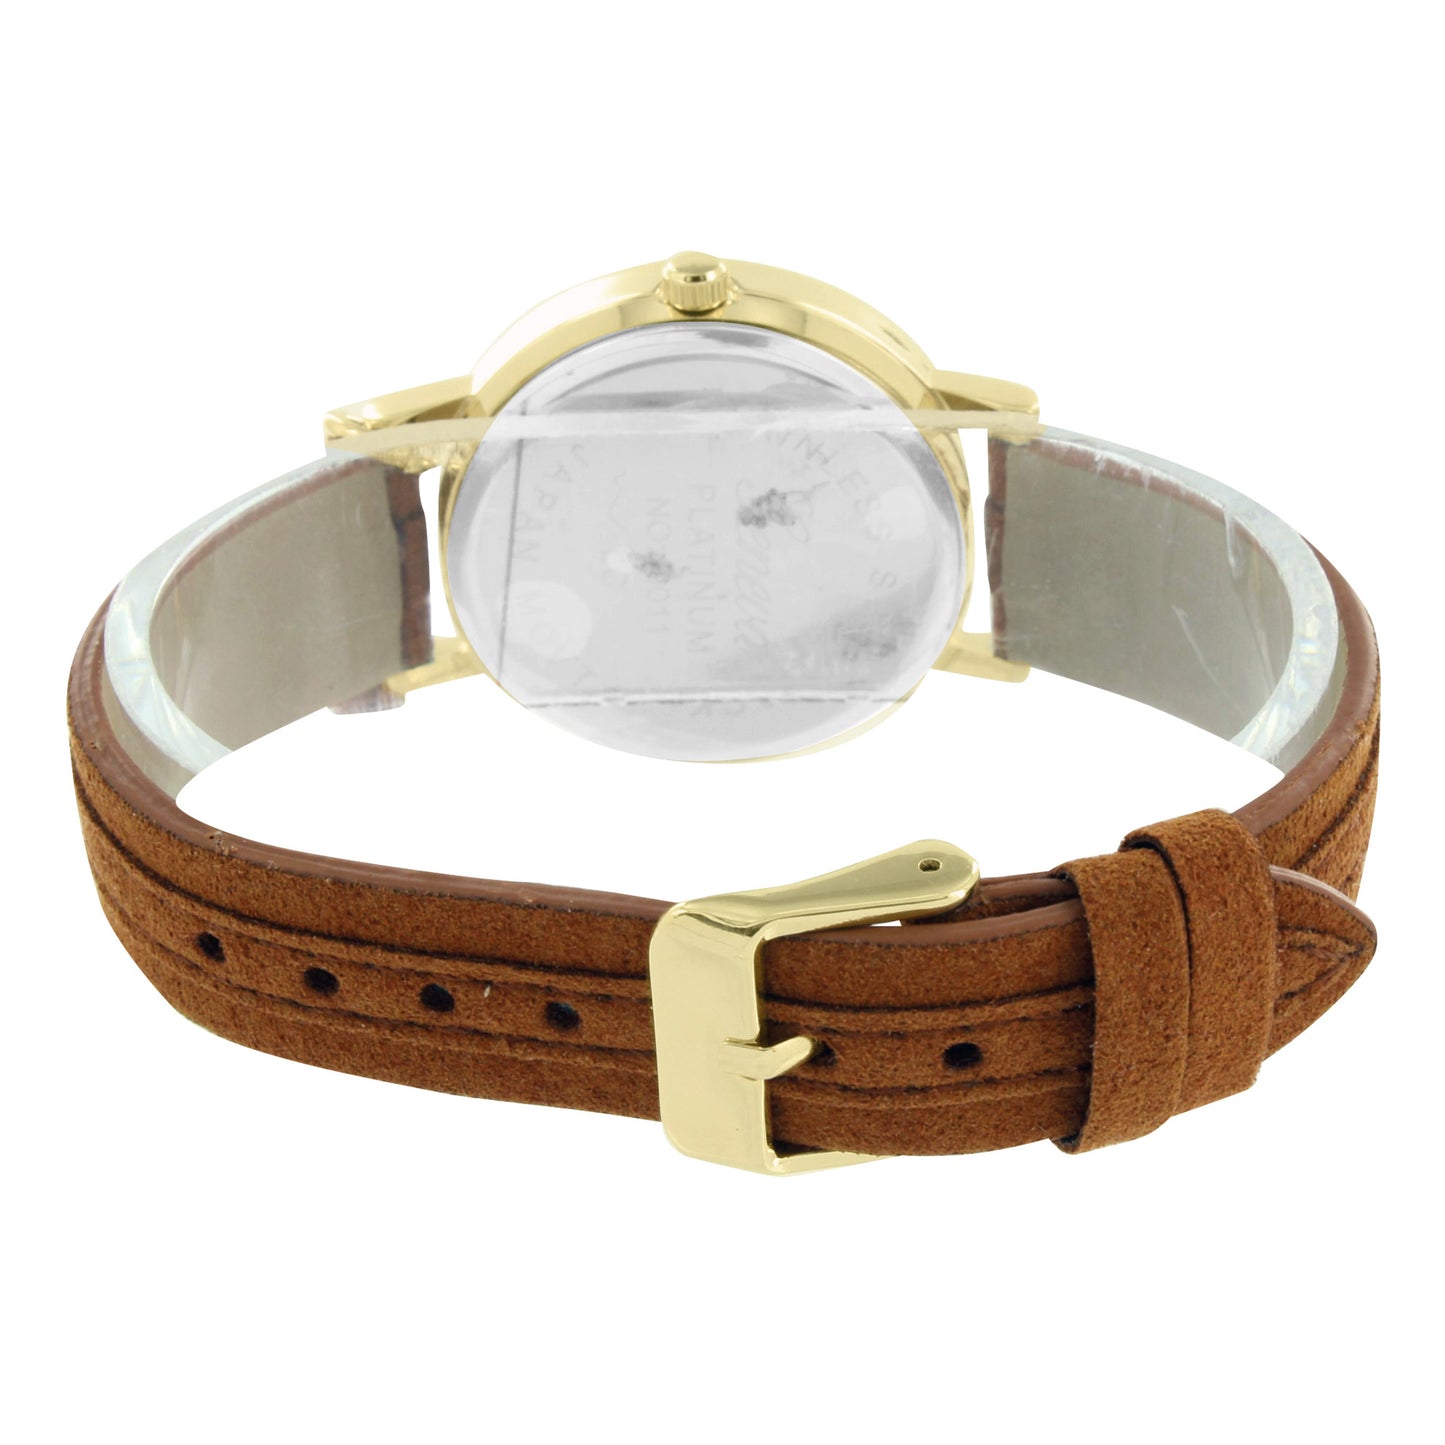 Gold Tone Watch White Dial Brown Suede Strap Water Resistant Round Face 35 MM